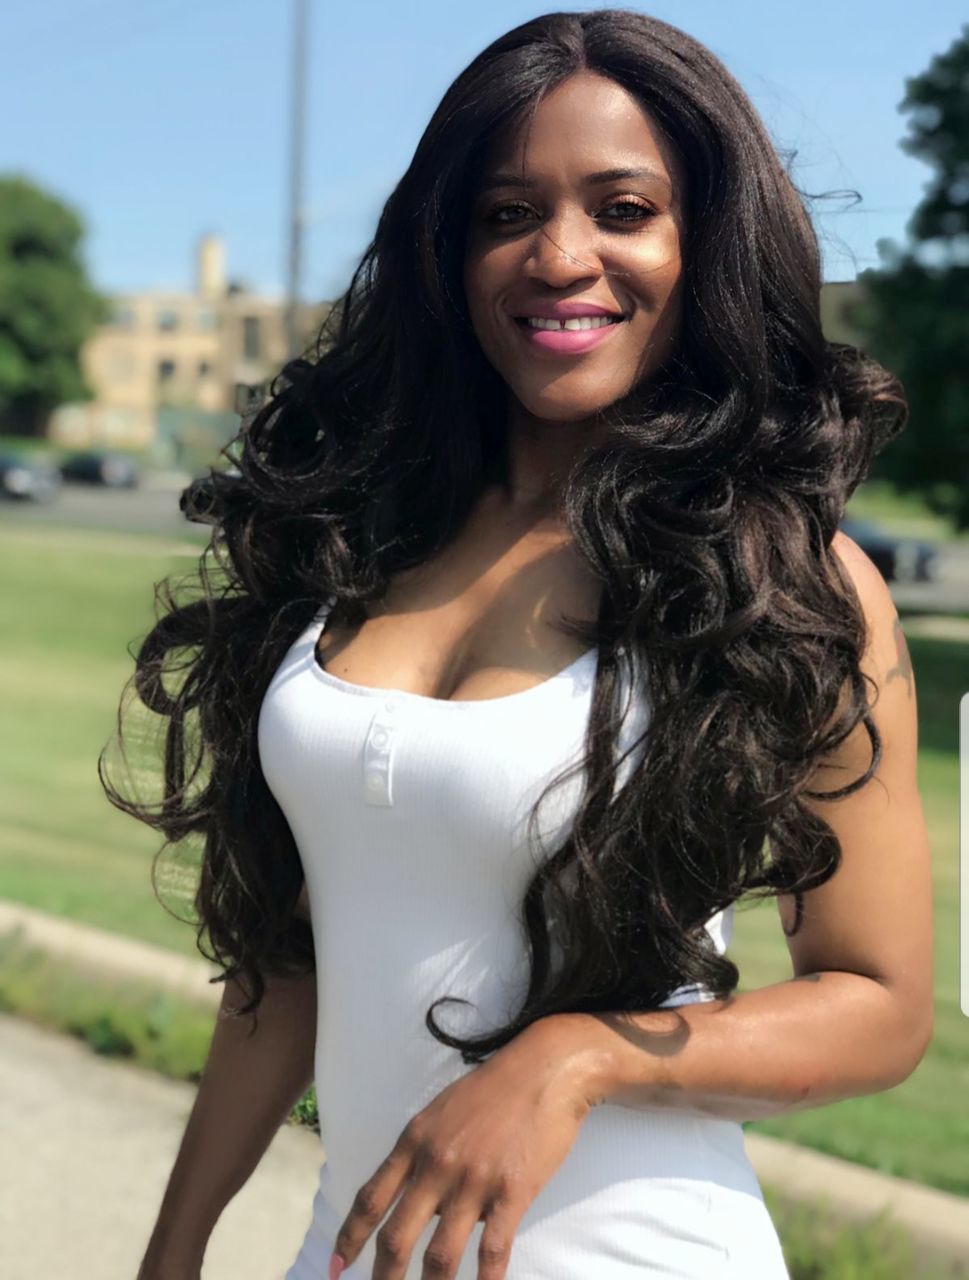 long hair, hair, young women, hairstyle, looking at camera, smiling, young adult, happiness, portrait, one person, focus on foreground, three quarter length, beauty, real people, women, leisure activity, standing, lifestyles, beautiful woman, day, black hair, fashion, outdoors